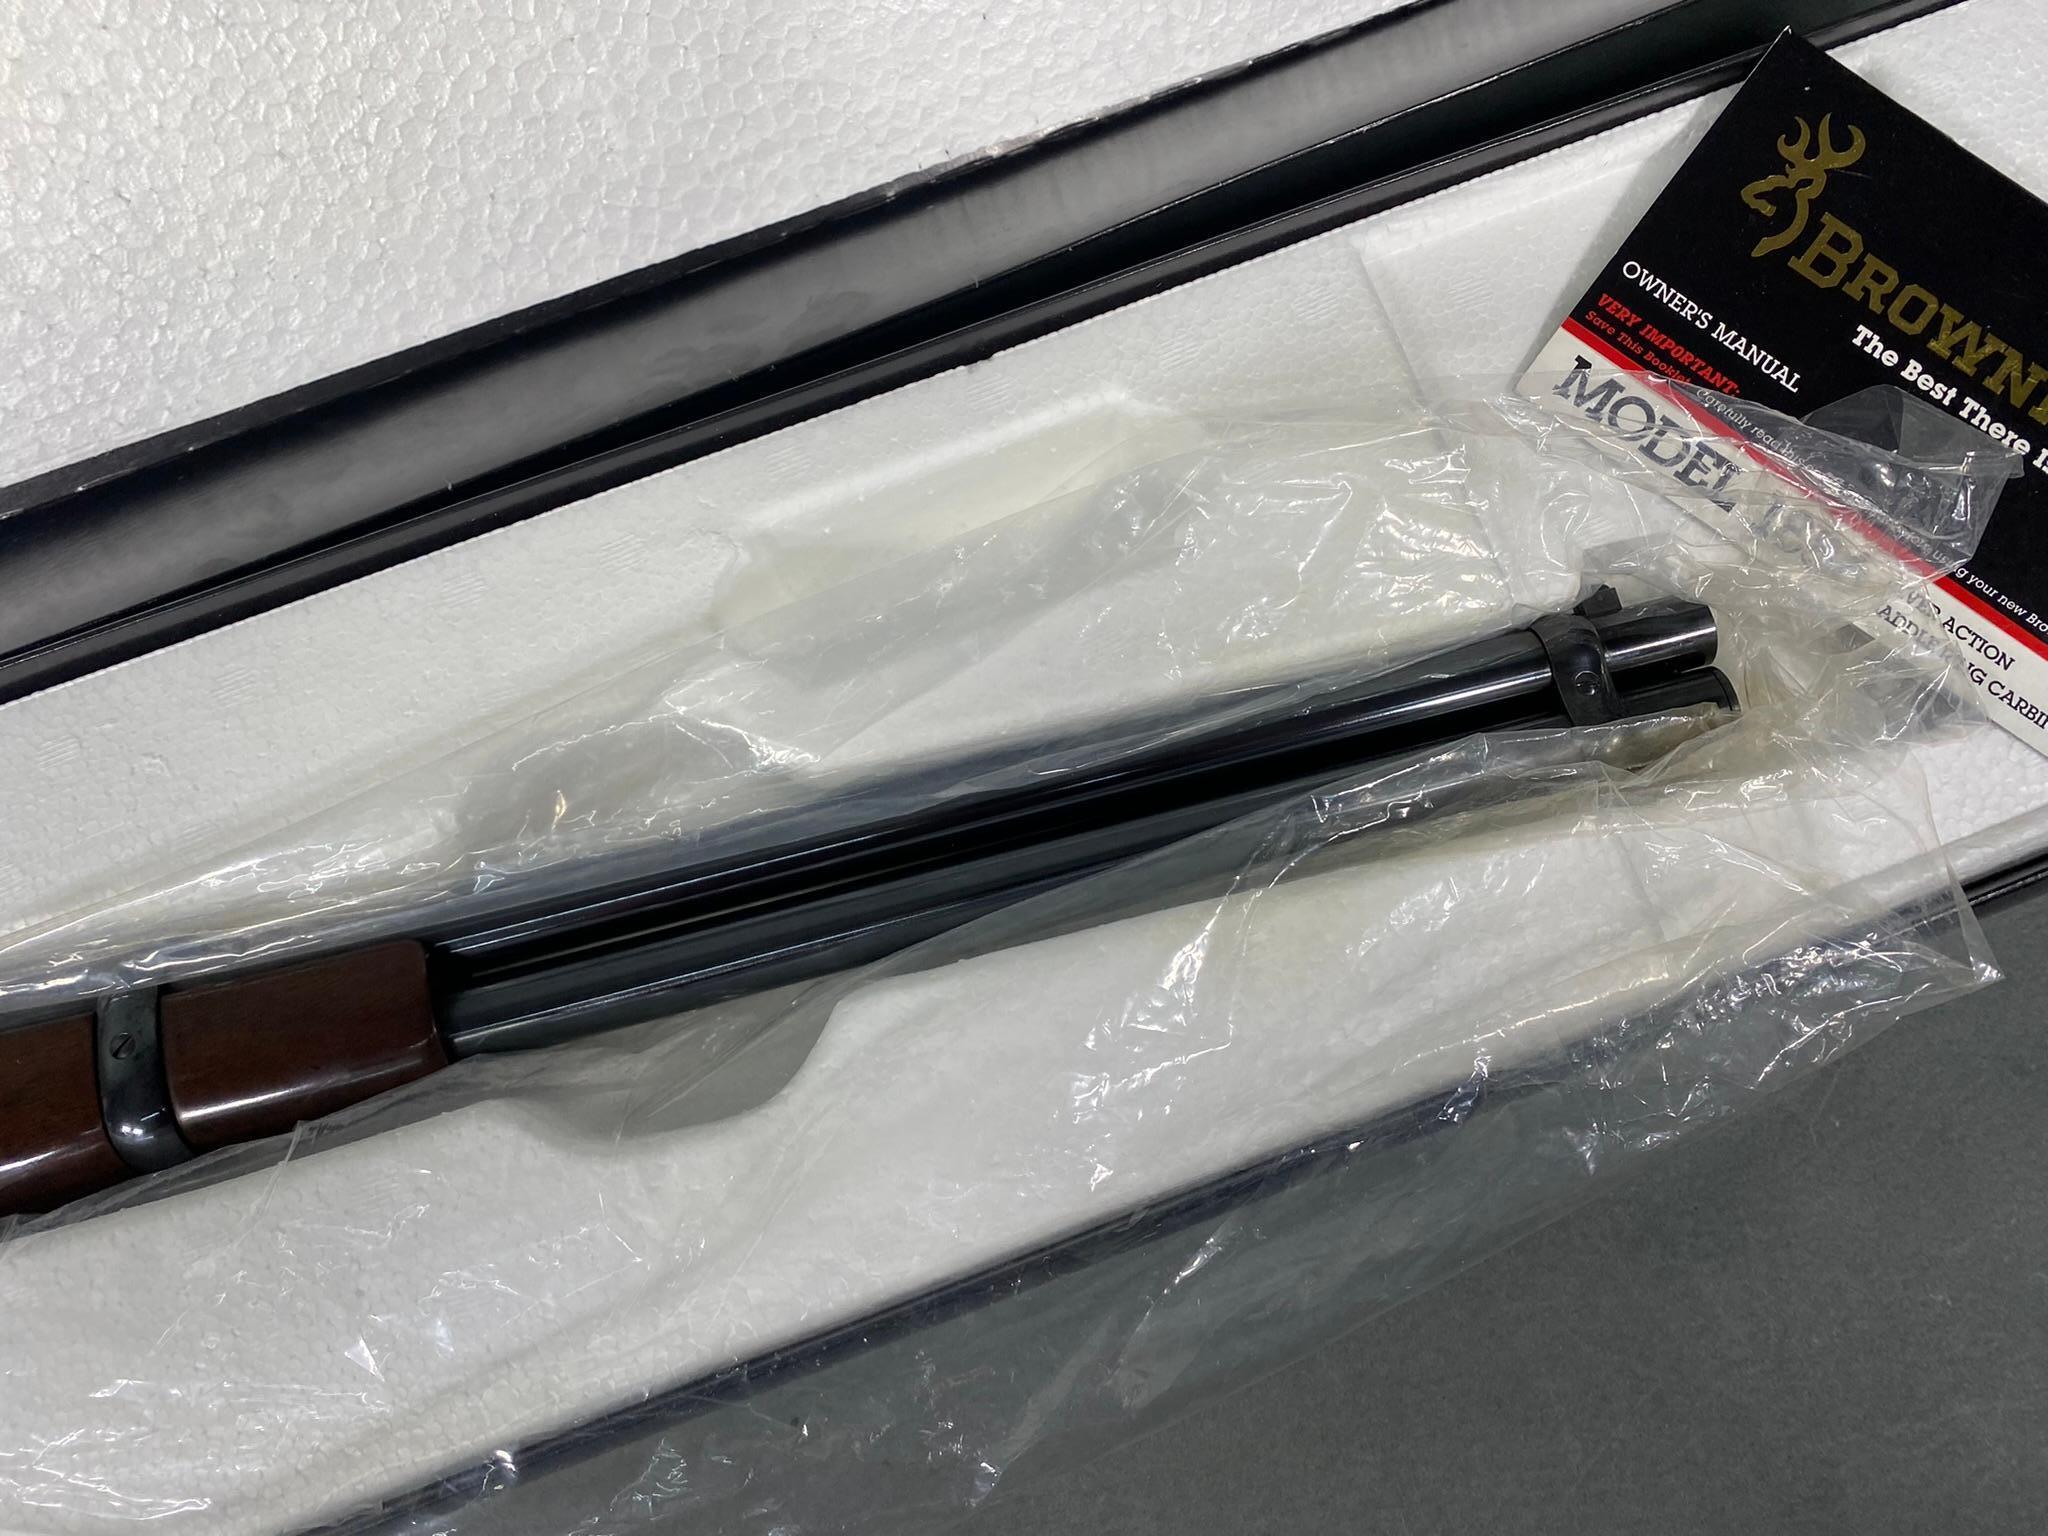 Browning Model 1886 Rifle 45-70 In Box Very Nice